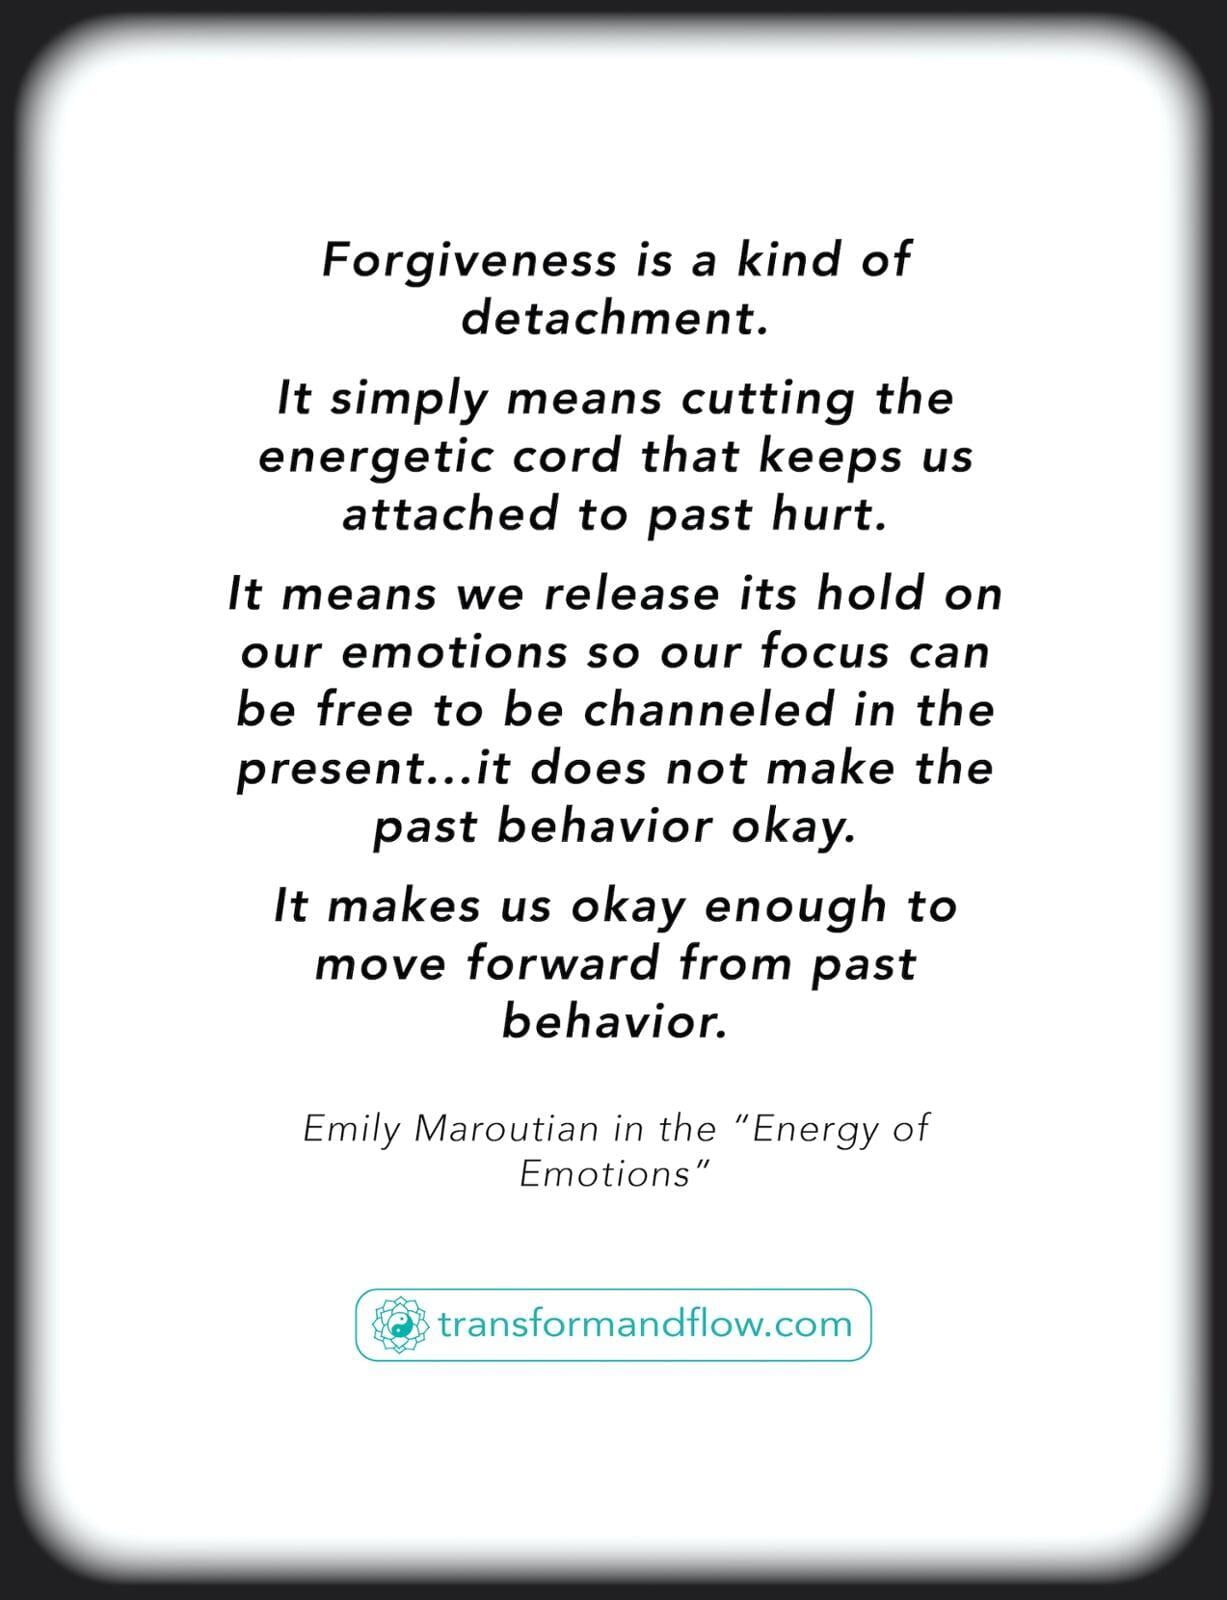 Forgiveness is a kind of detachment. It simply means cutting the energetic cord that keeps us attached to past hurt. It means we release its hold on our emotions so our focus can be free to be channeled in the present.…it does not make the past behavior okay. It makes us okay enough to move forward from past behavior. Emily Maroutian in the "Energy of Emotions"